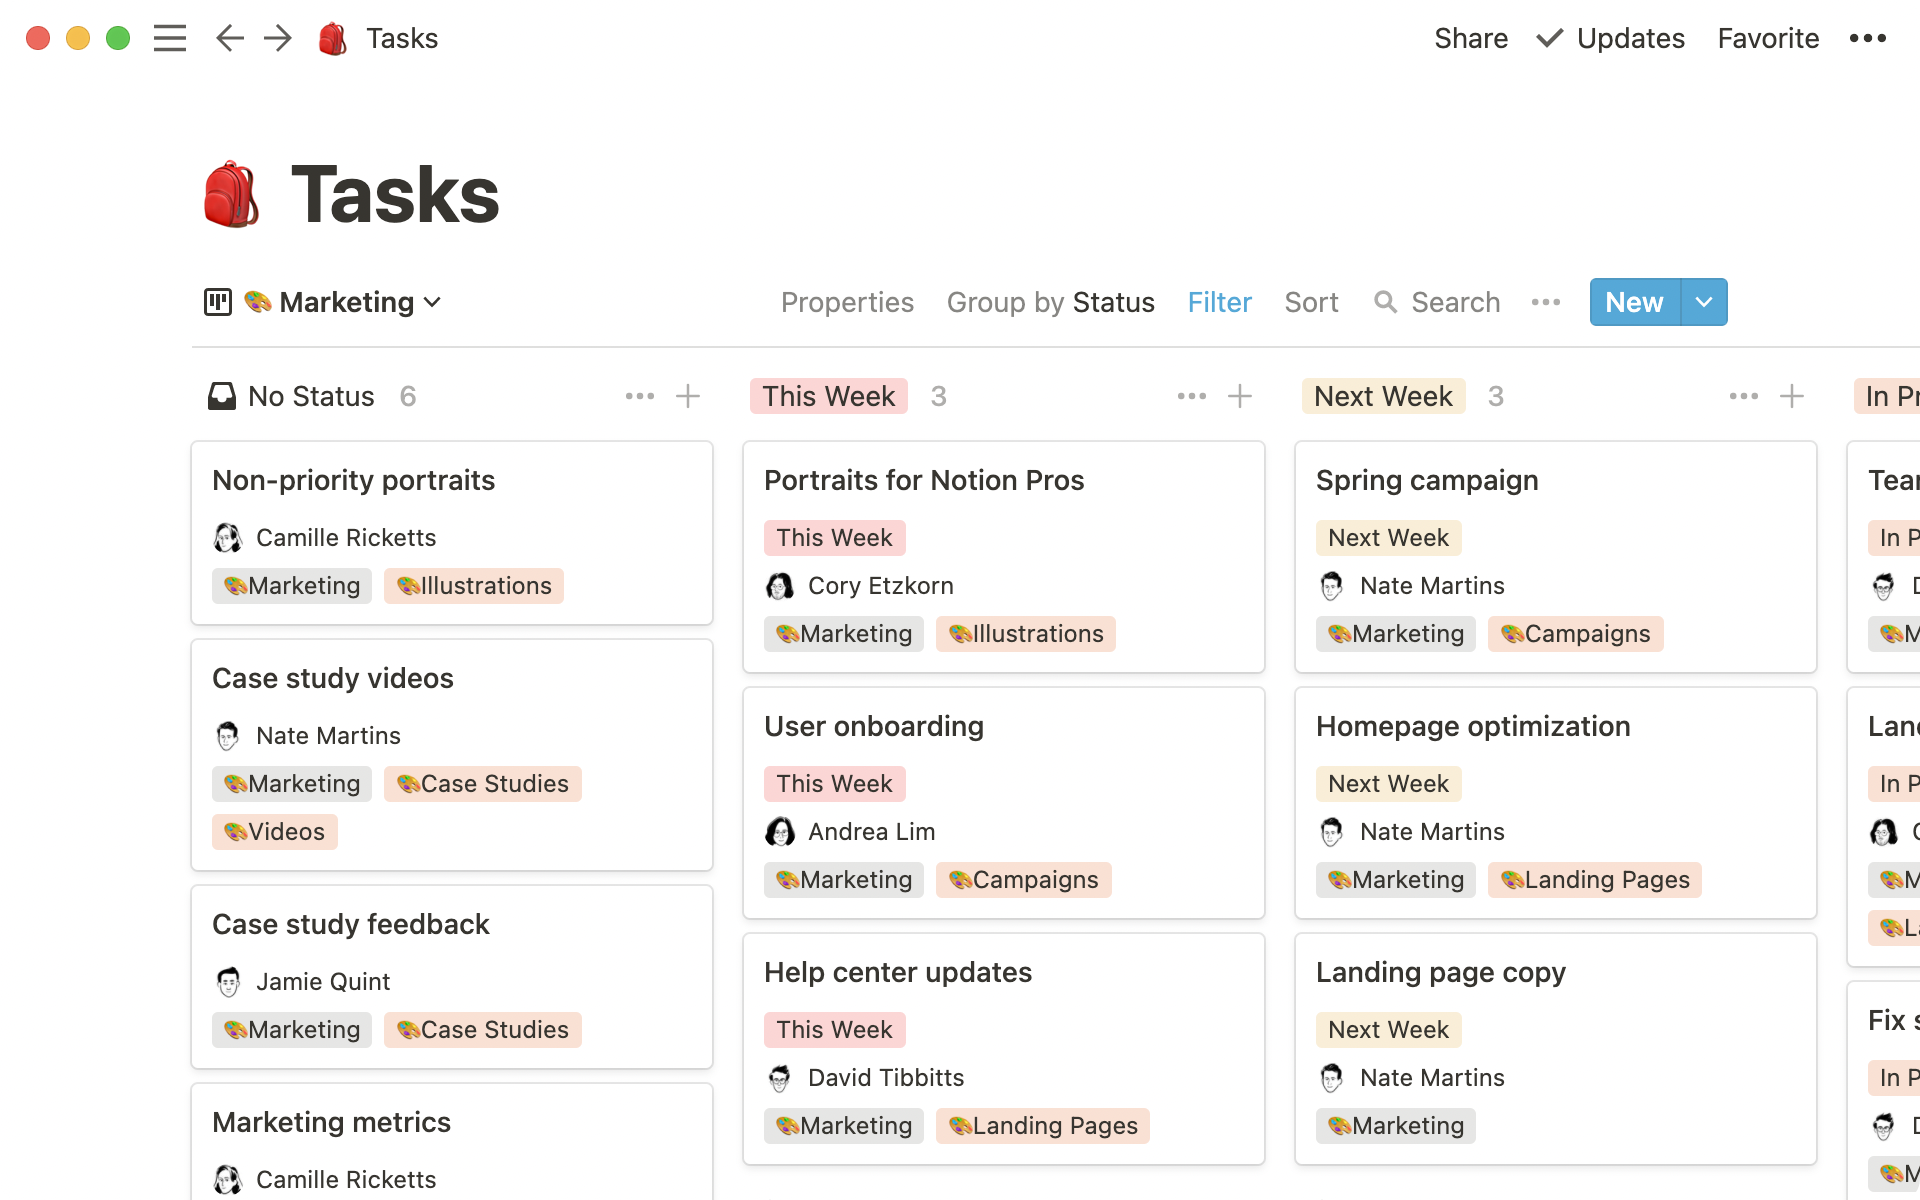 The marketing team’s view of our shared tasks database.